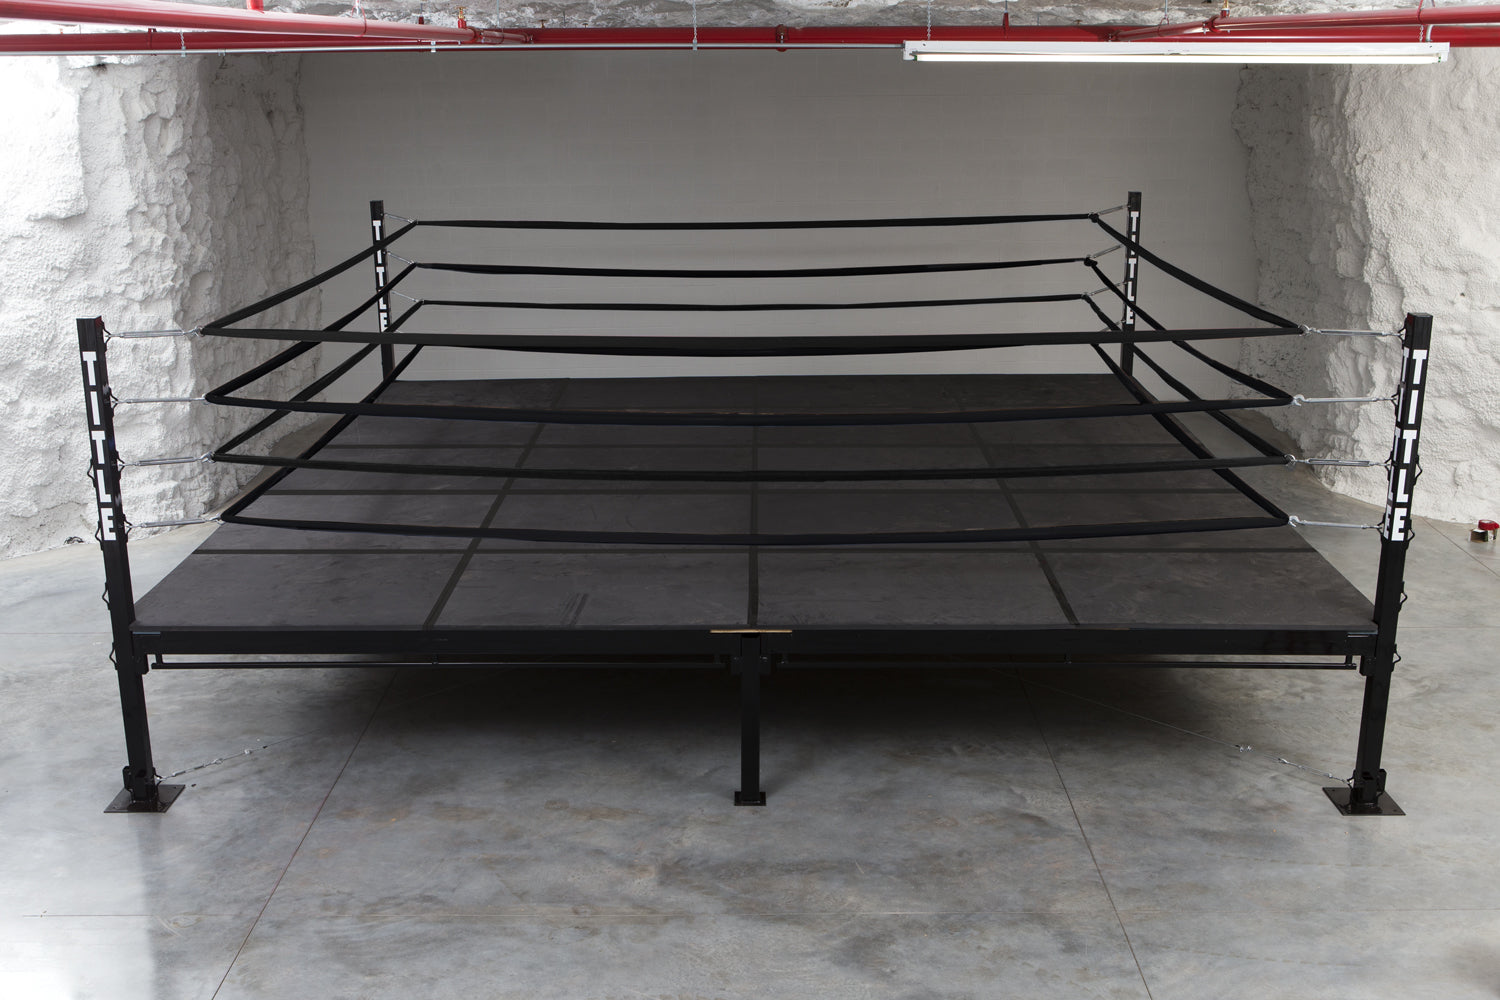 Customize International Standard Floor Boxing Ring Wrestling Elavated Boxing  Ring for Competition - China Boxing Ring and Inflatable Boxing Ring price |  Made-in-China.com